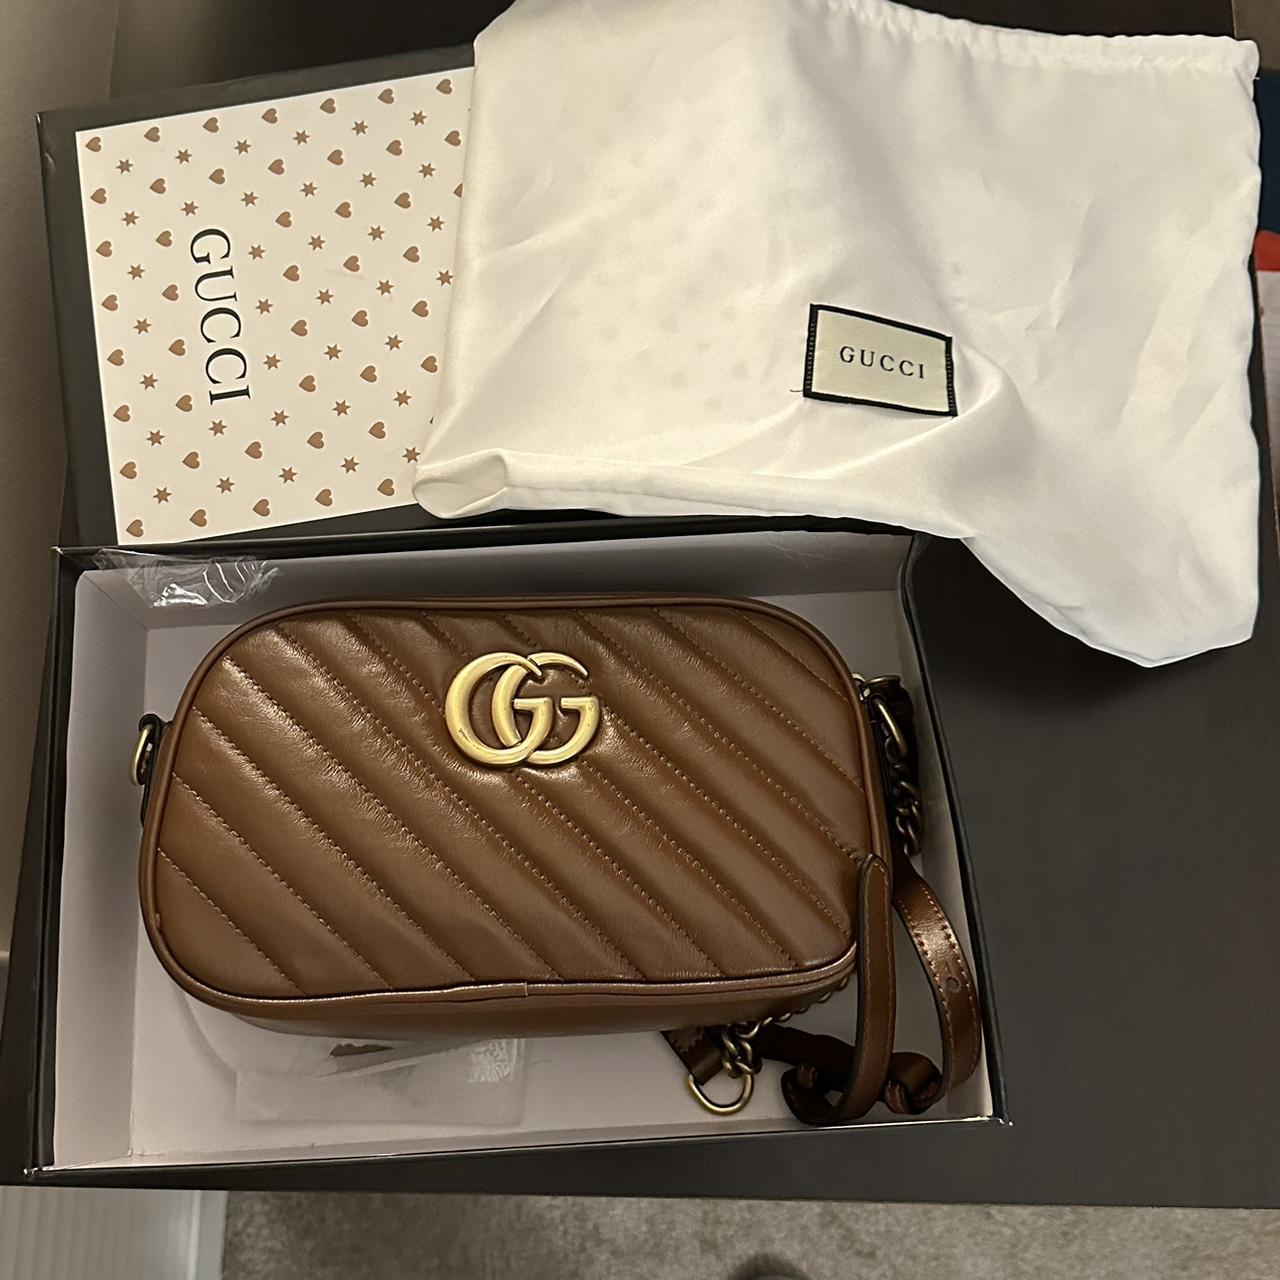 Gucci Beauty Bag, From Gift Set. Excellent - Depop